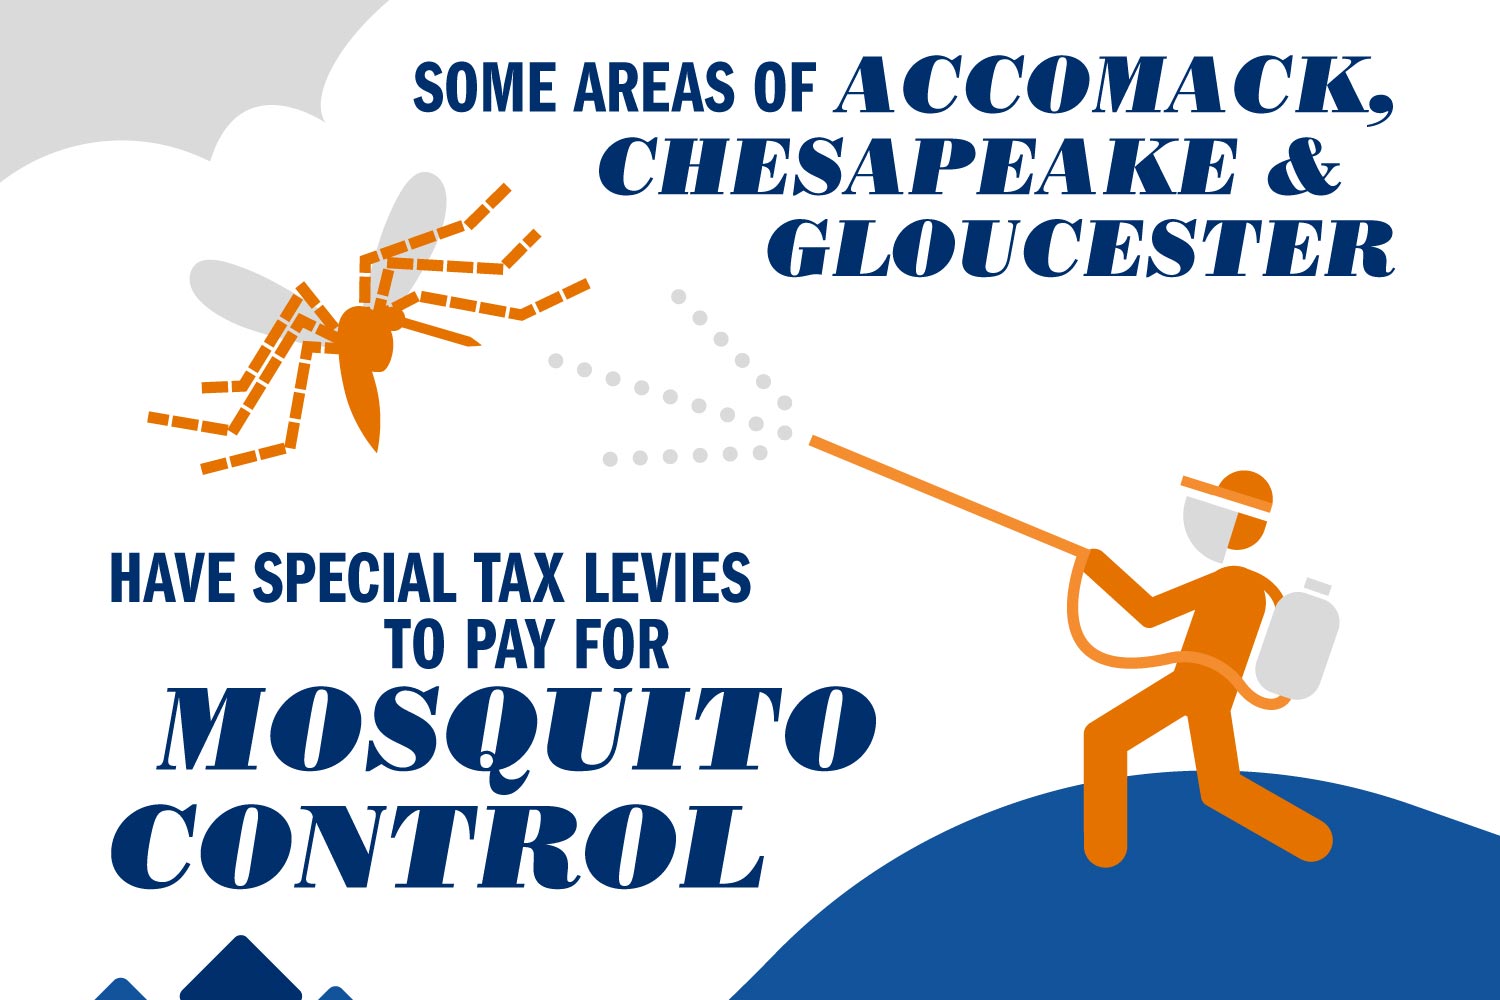 Text reads: Some areas of Accomack, Chesapeake & Gloucester have special tax levies to pay for Mosquito control